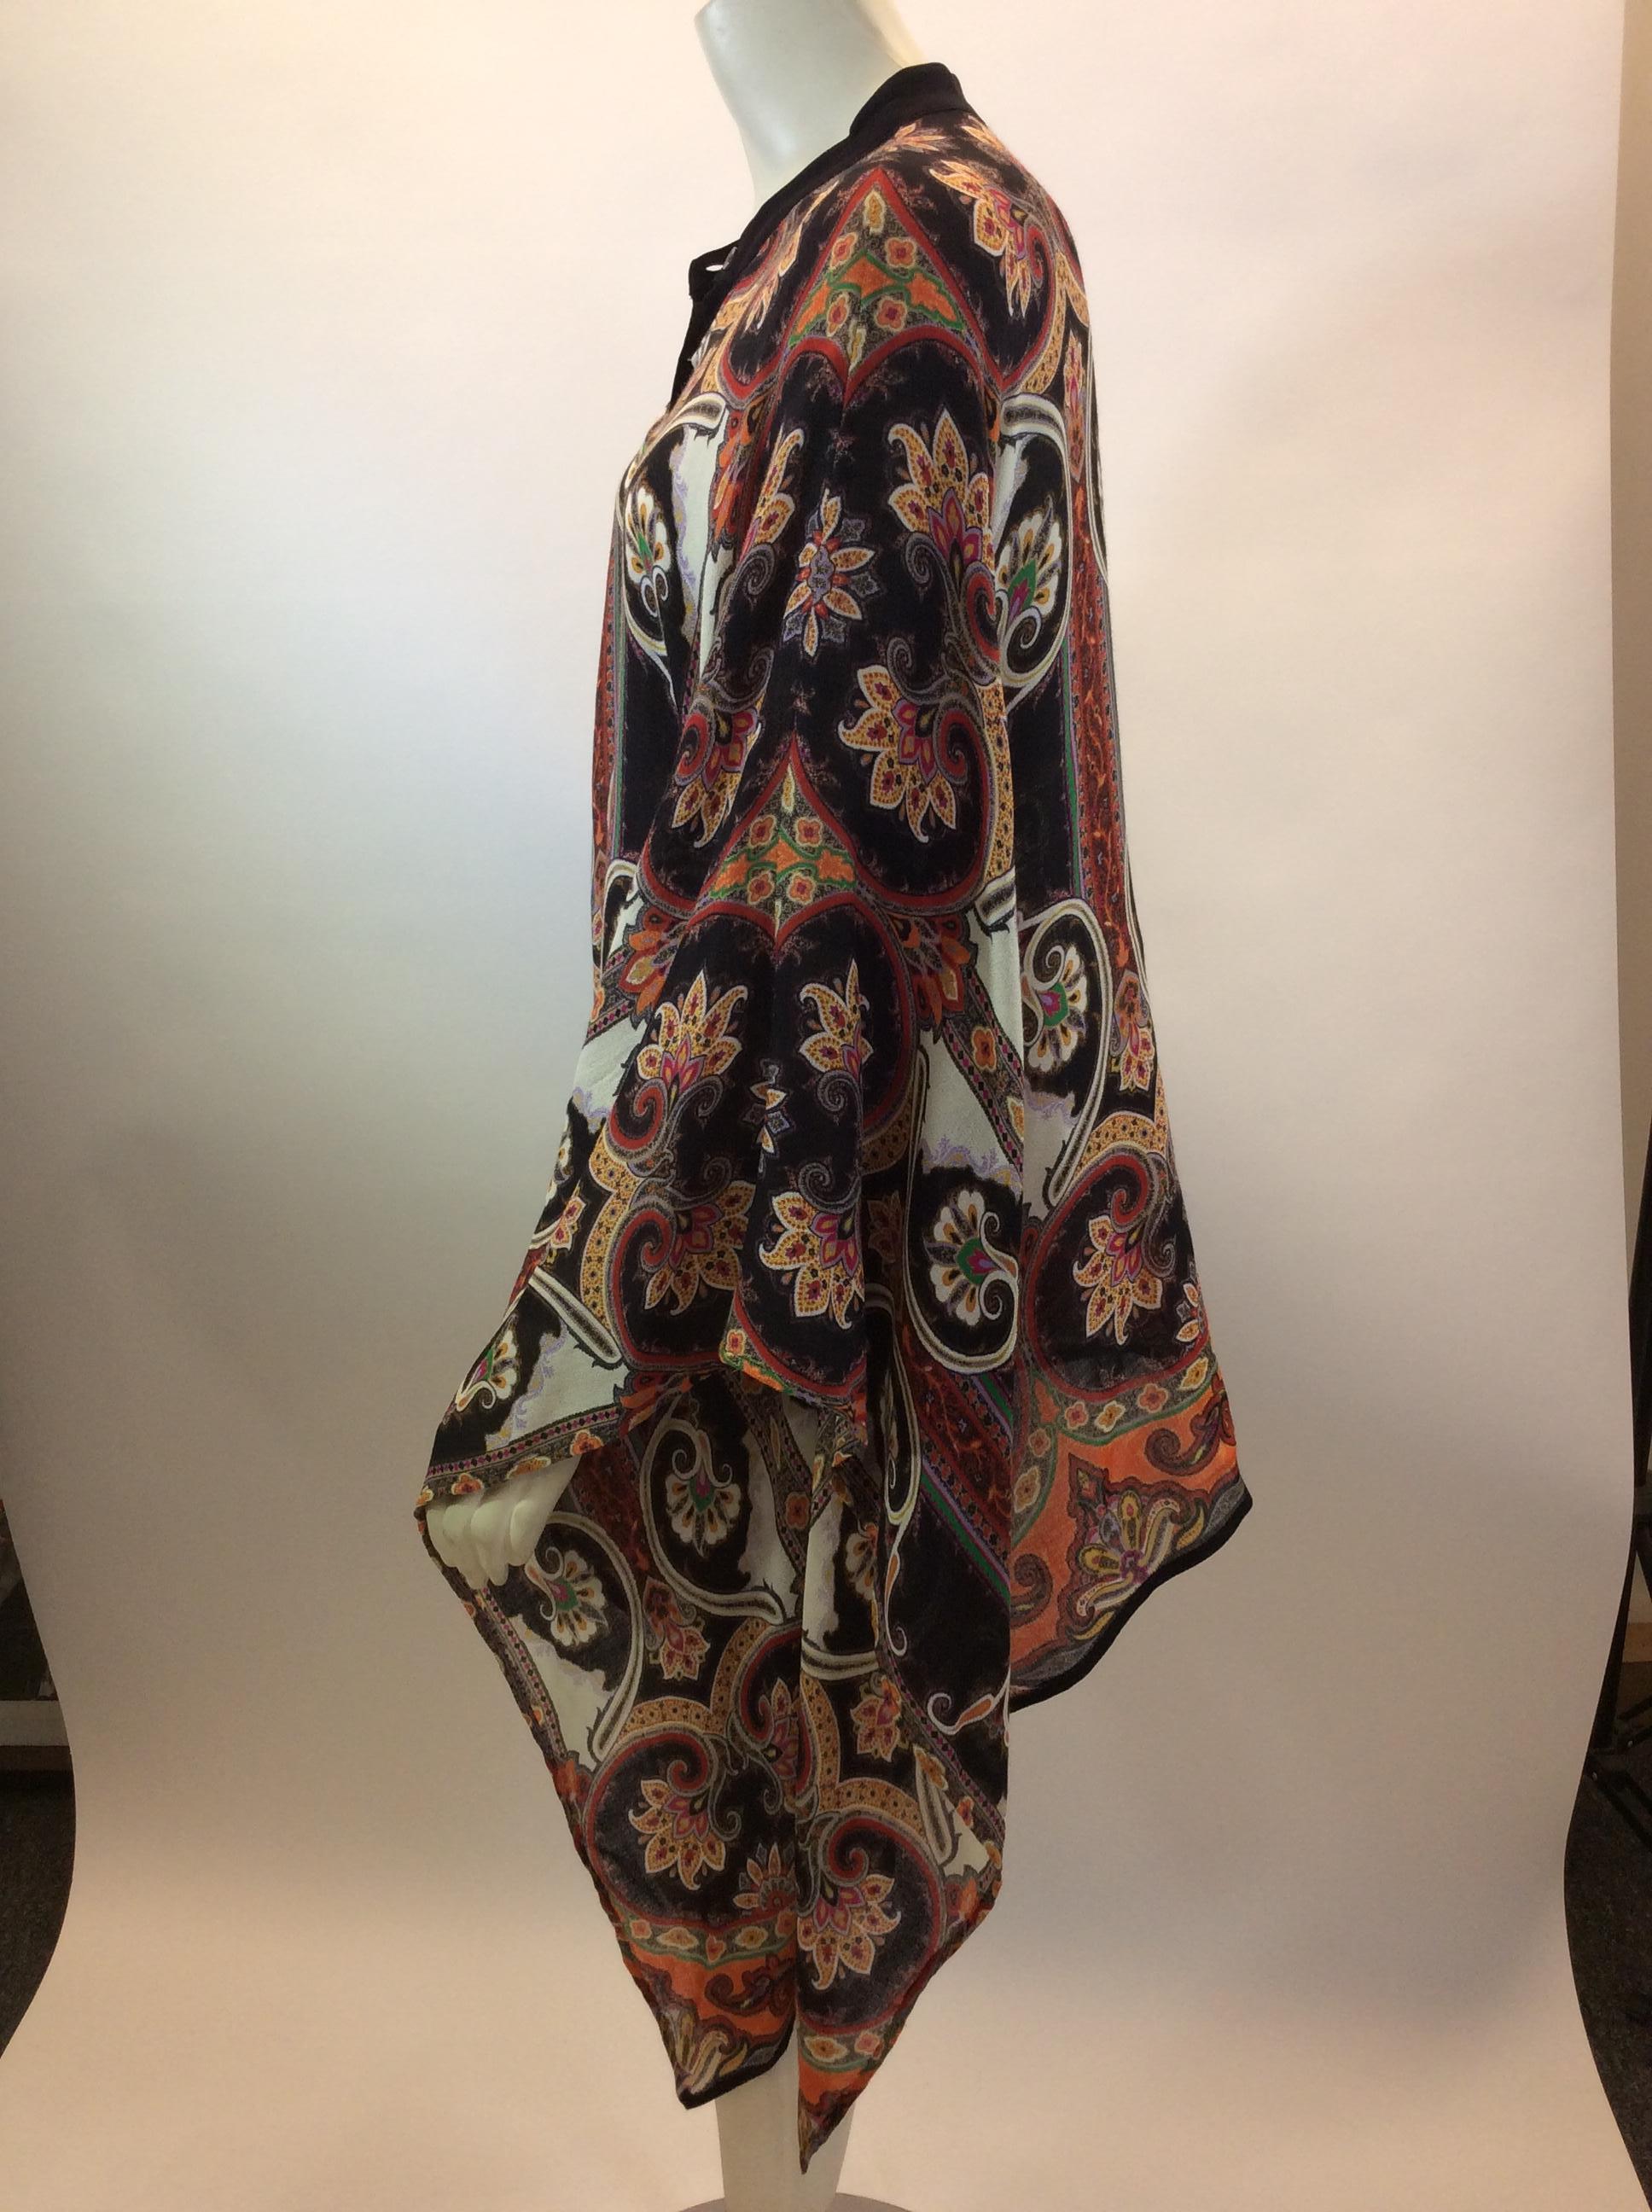 Etro Multi-Color Print Silk Blouse
$450
Made in Italy
100% Silk
Length: 27.5